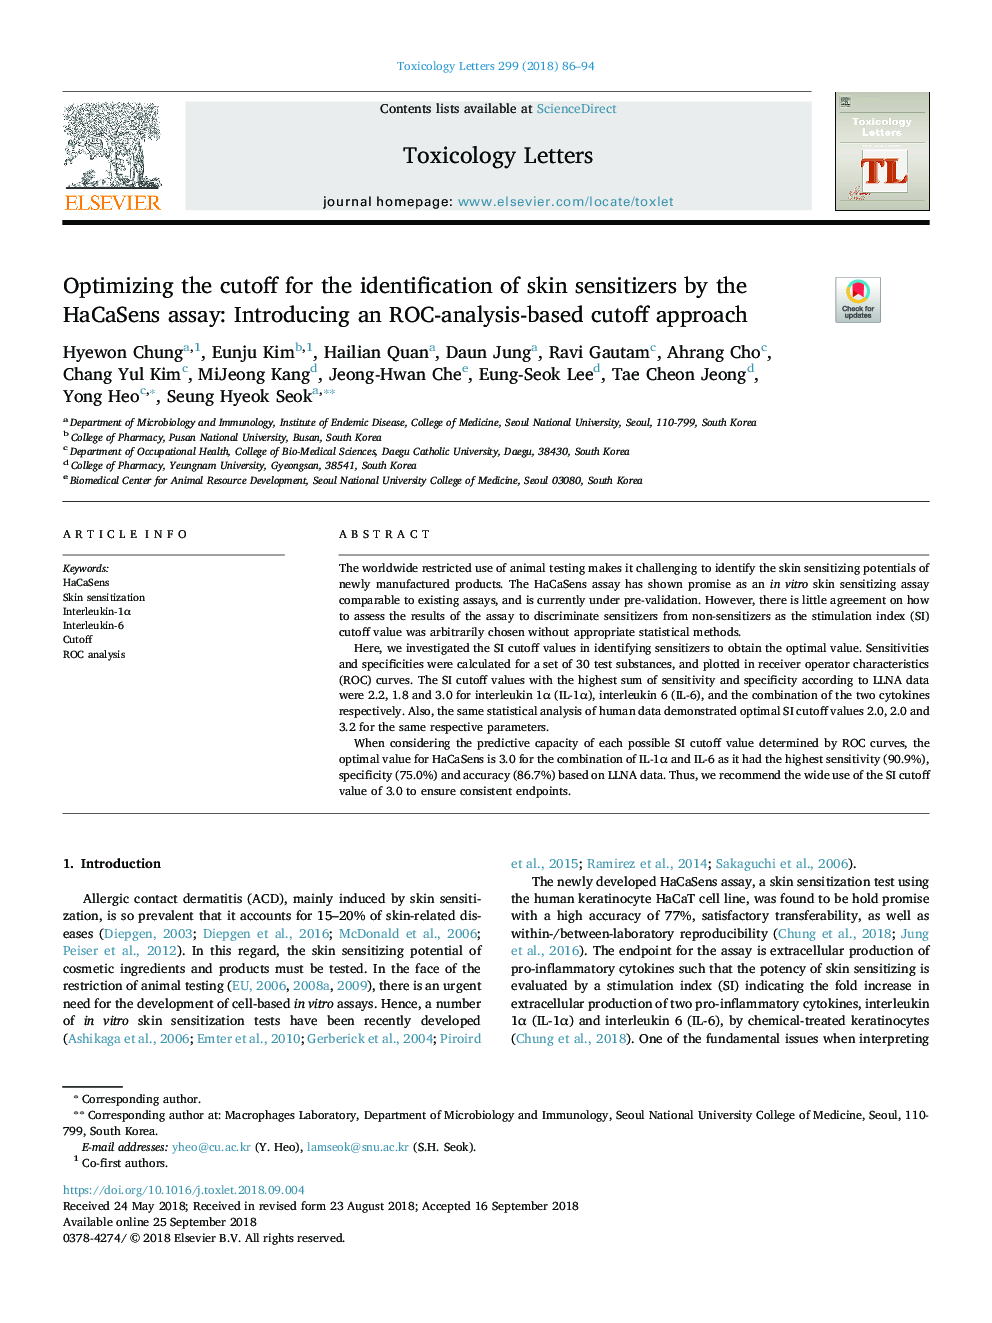 Optimizing the cutoff for the identification of skin sensitizers by the HaCaSens assay: Introducing an ROC-analysis-based cutoff approach